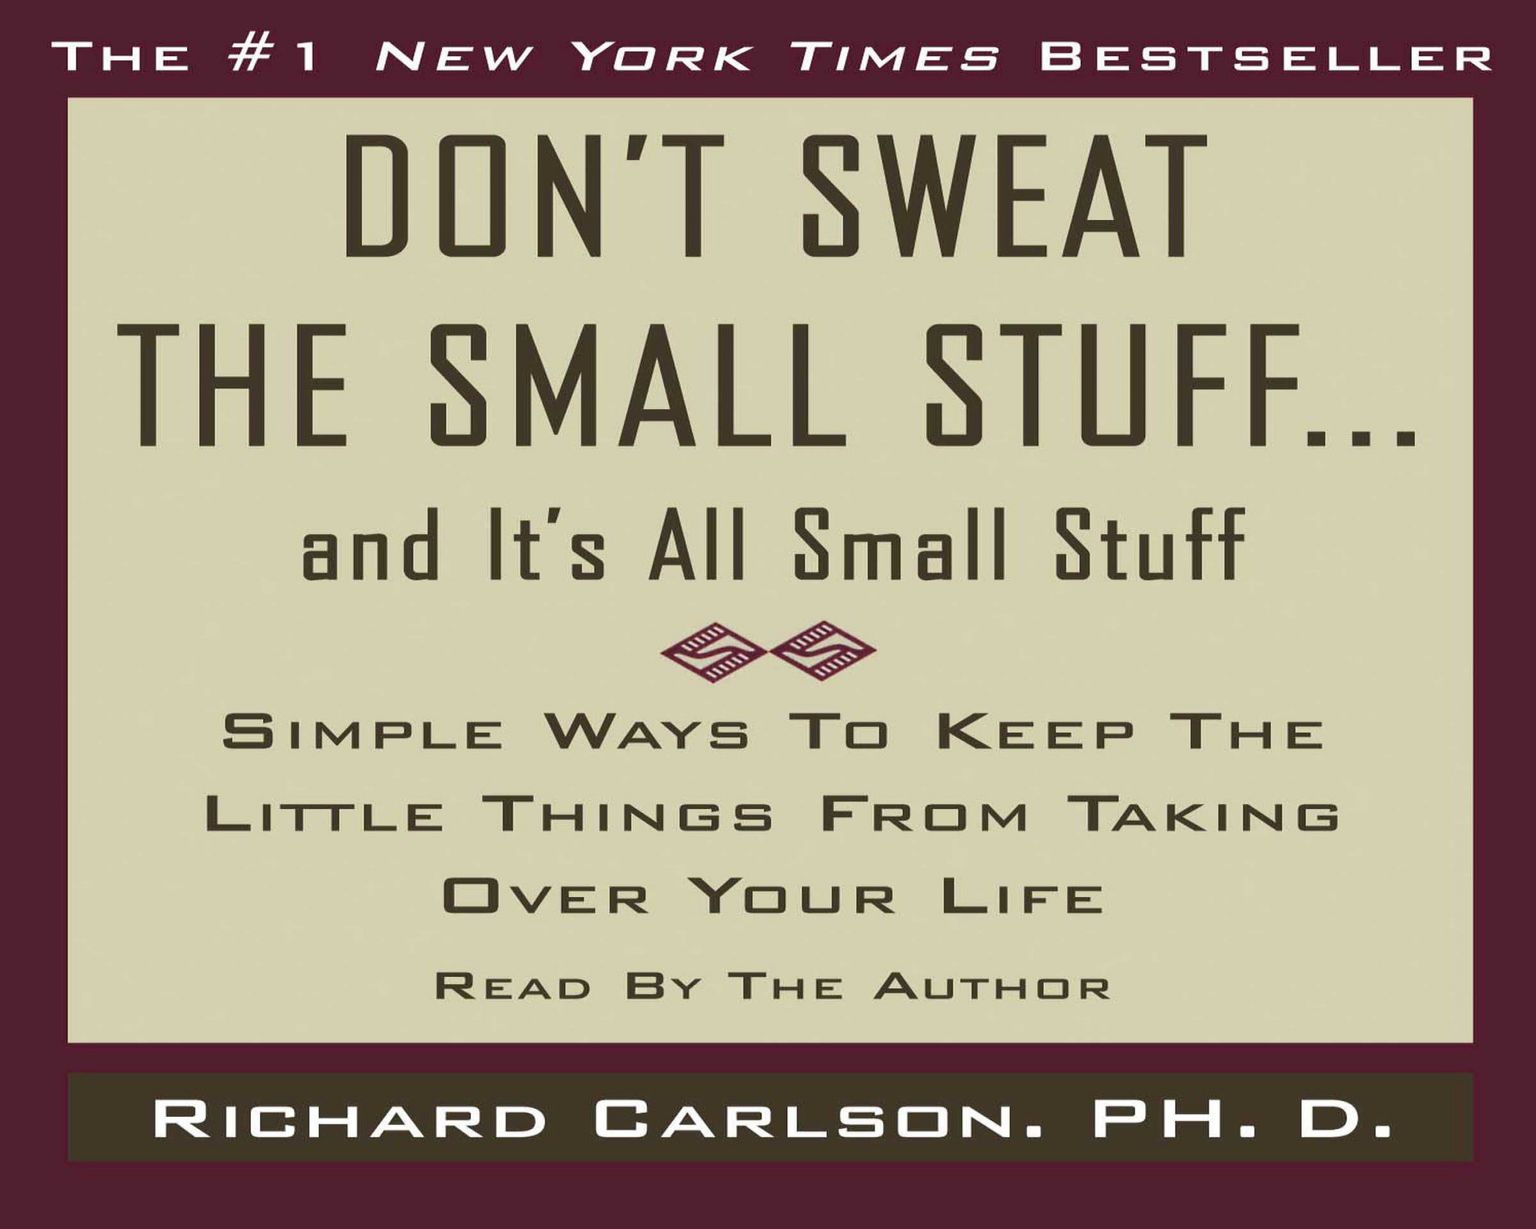 Don't Sweat the Small Stuff... and it's all Small Stuff